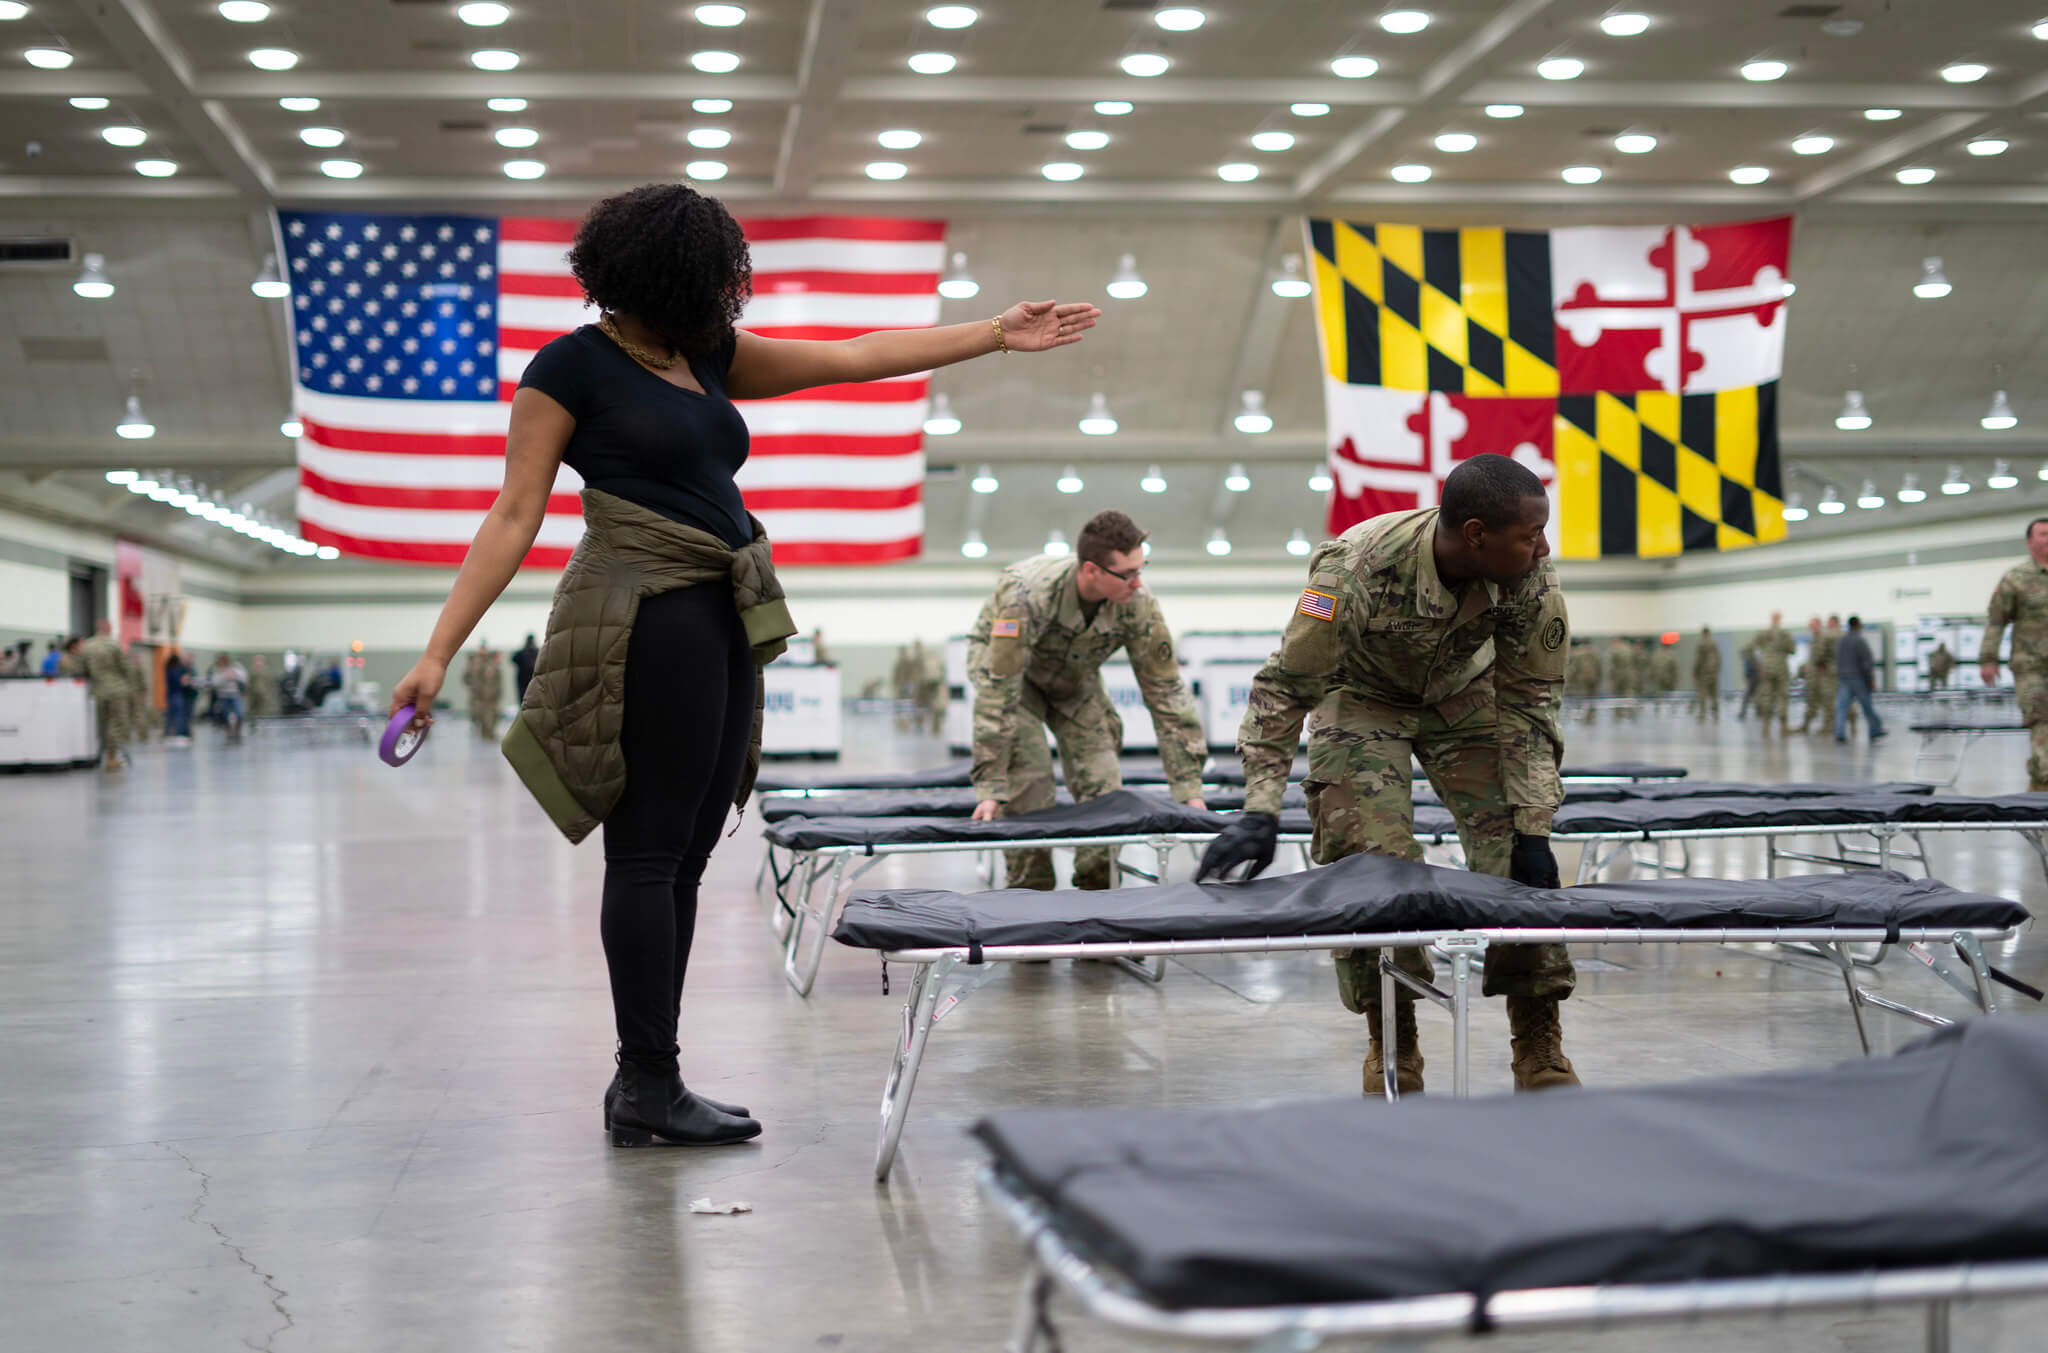 Biscop-Maryland Army National Guard Soldiers work with local, state, and federal partners to establish a Federal Medical Station as an alternate medical facility at the Baltimore Convention Center in Maryland on March 28 2020. The National Guard